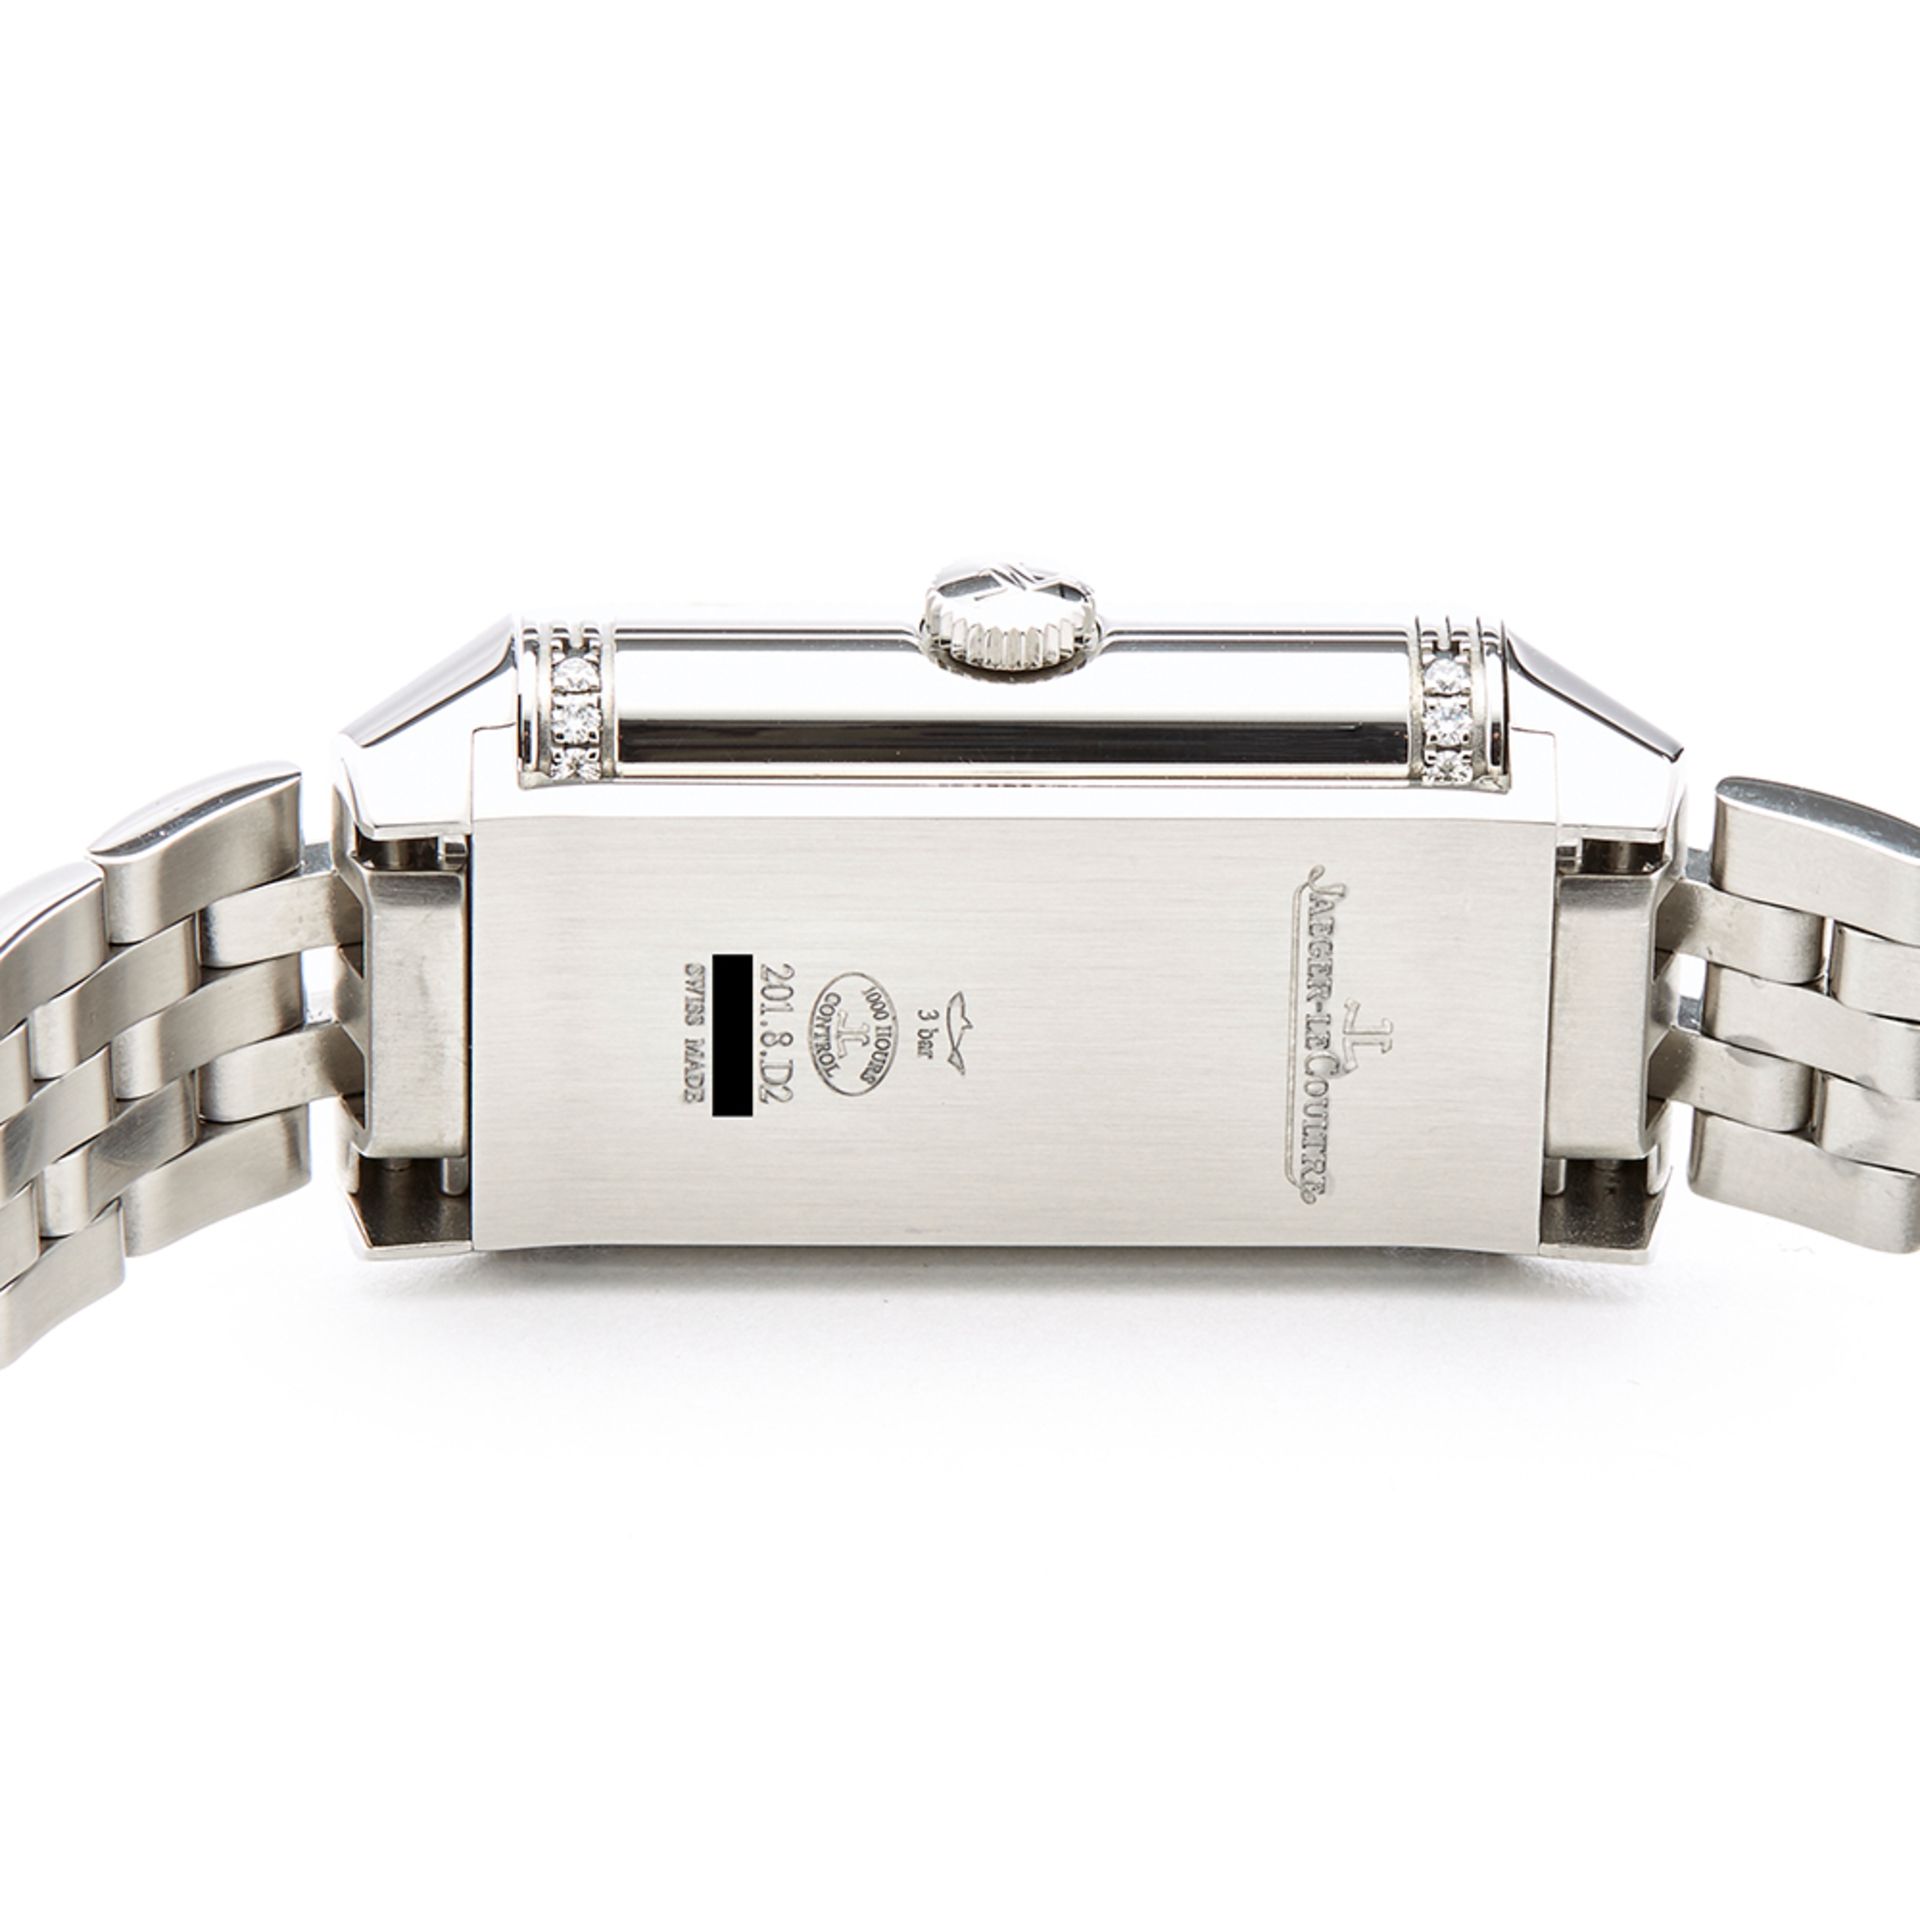 Jaeger-LeCoultre Reverso One Duetto Stainless Steel - Q3358420 - Image 9 of 9